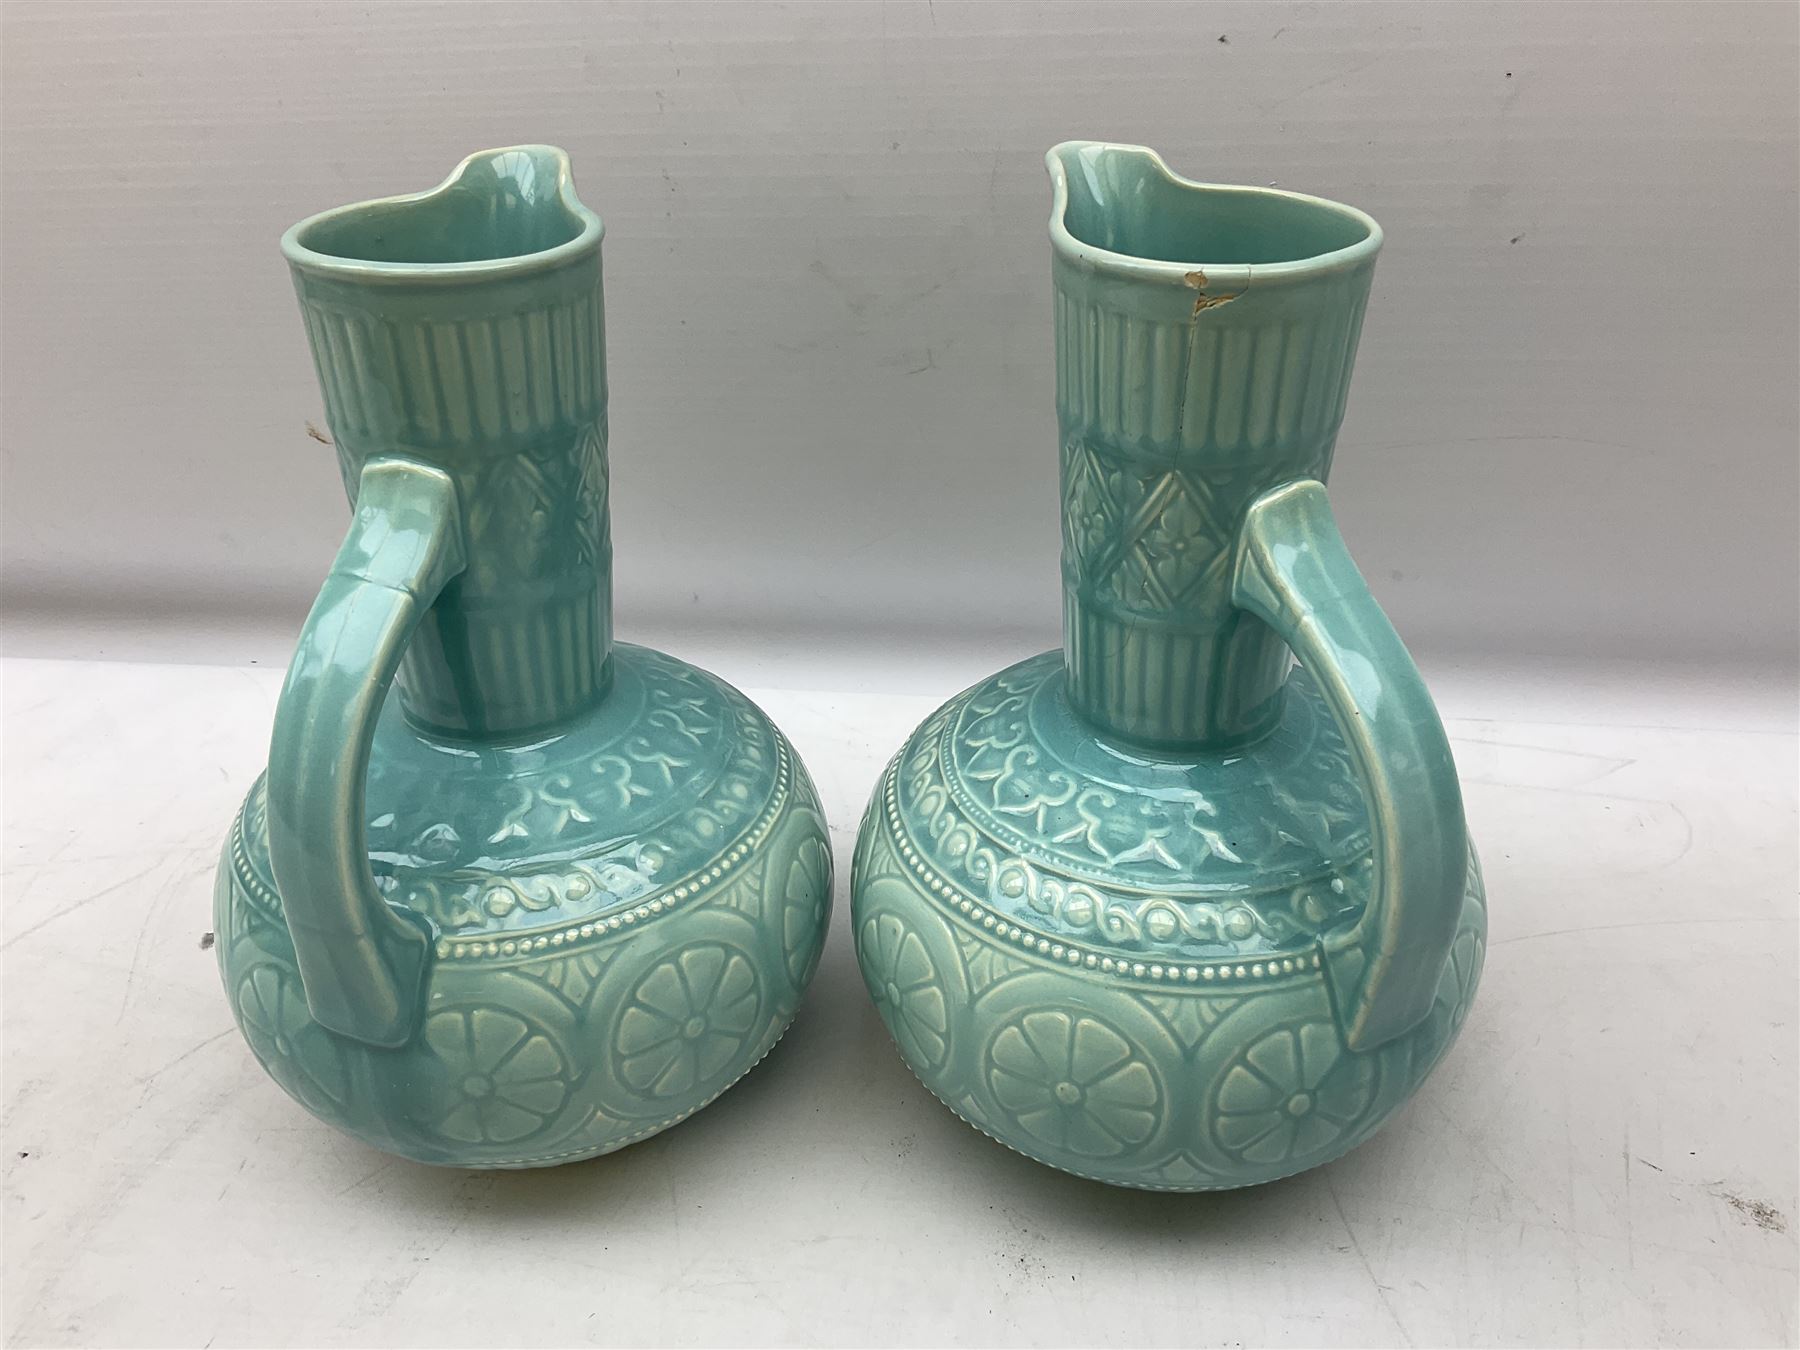 Pair of Lear pottery jugs with a blue ground and floral decoration - Image 4 of 6